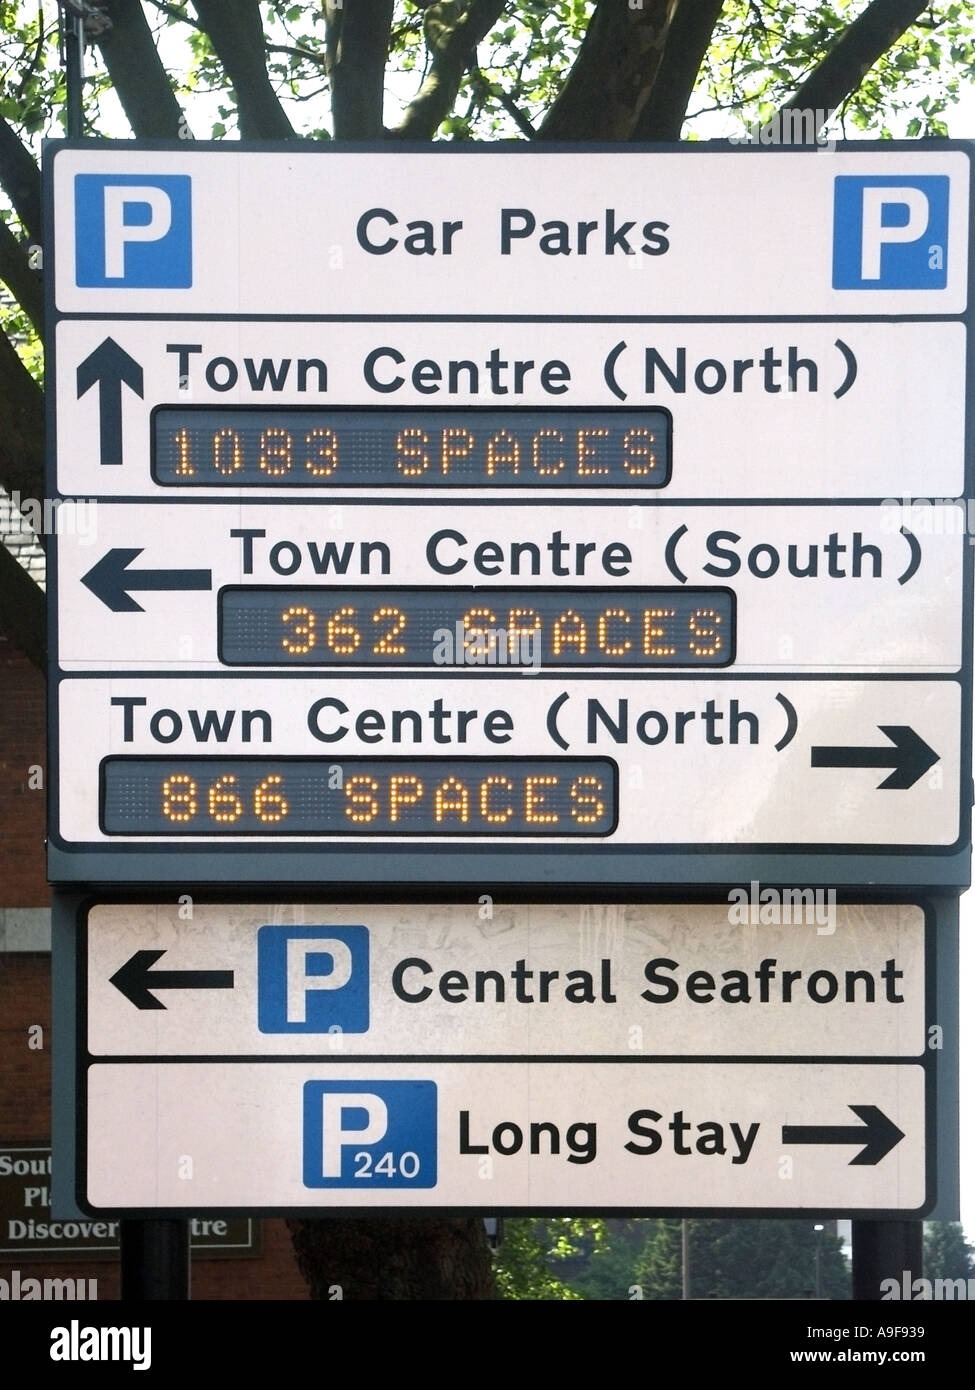 Southend on Sea electronic sign indicating location of car parks and numbers of parking spaces Stock Photo